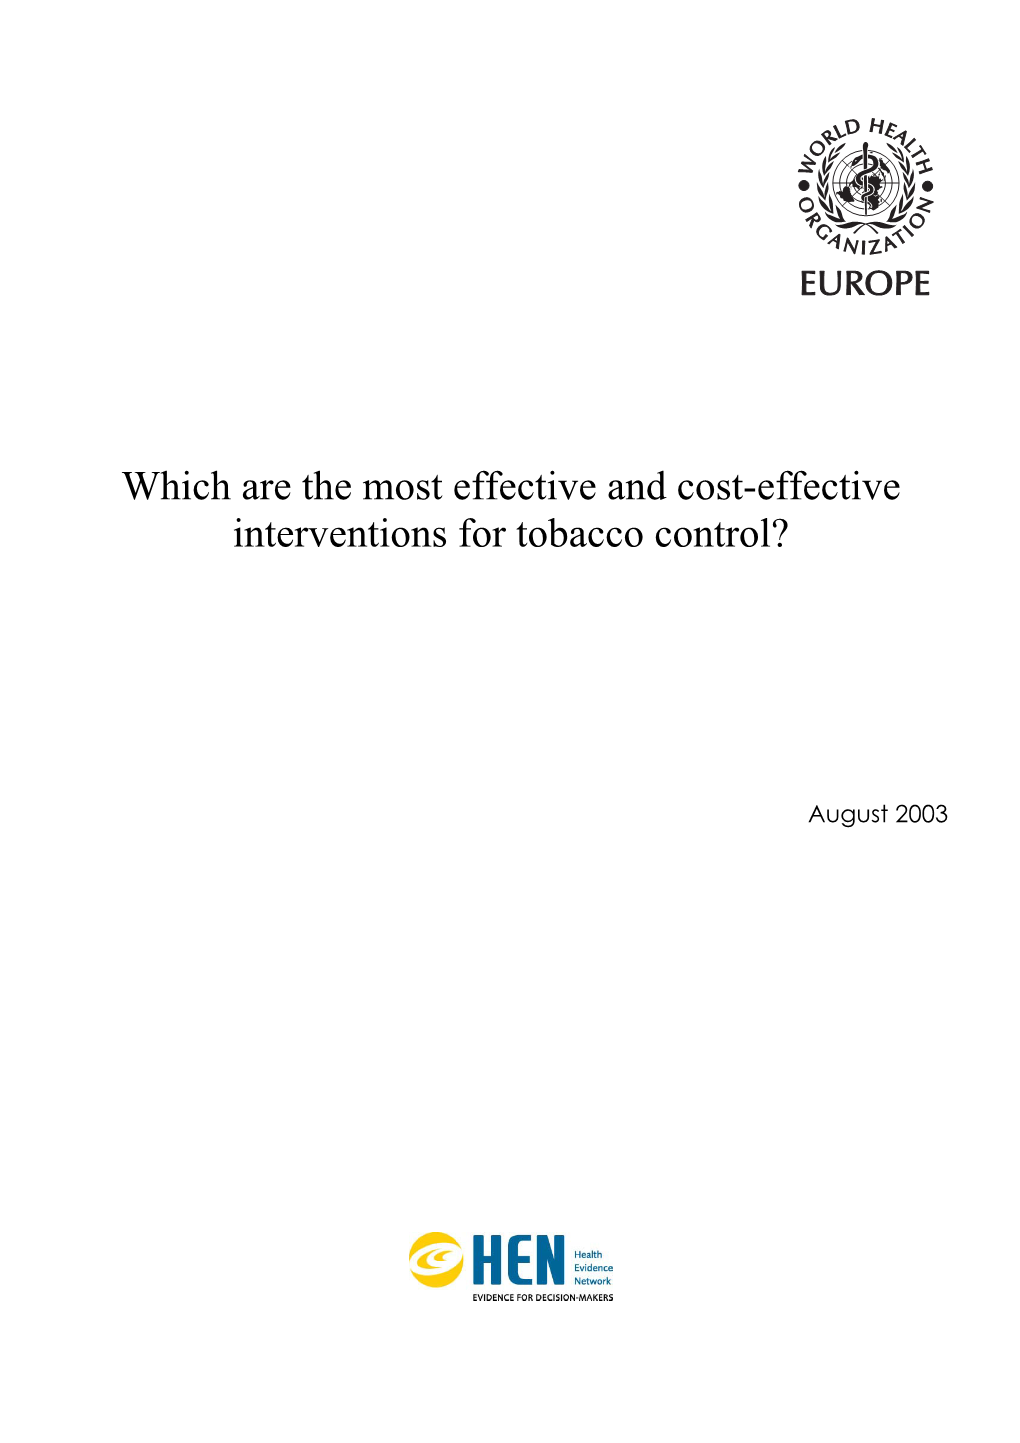 Which Are the Most Effective and Cost-Effective Interventions for Tobacco Control?